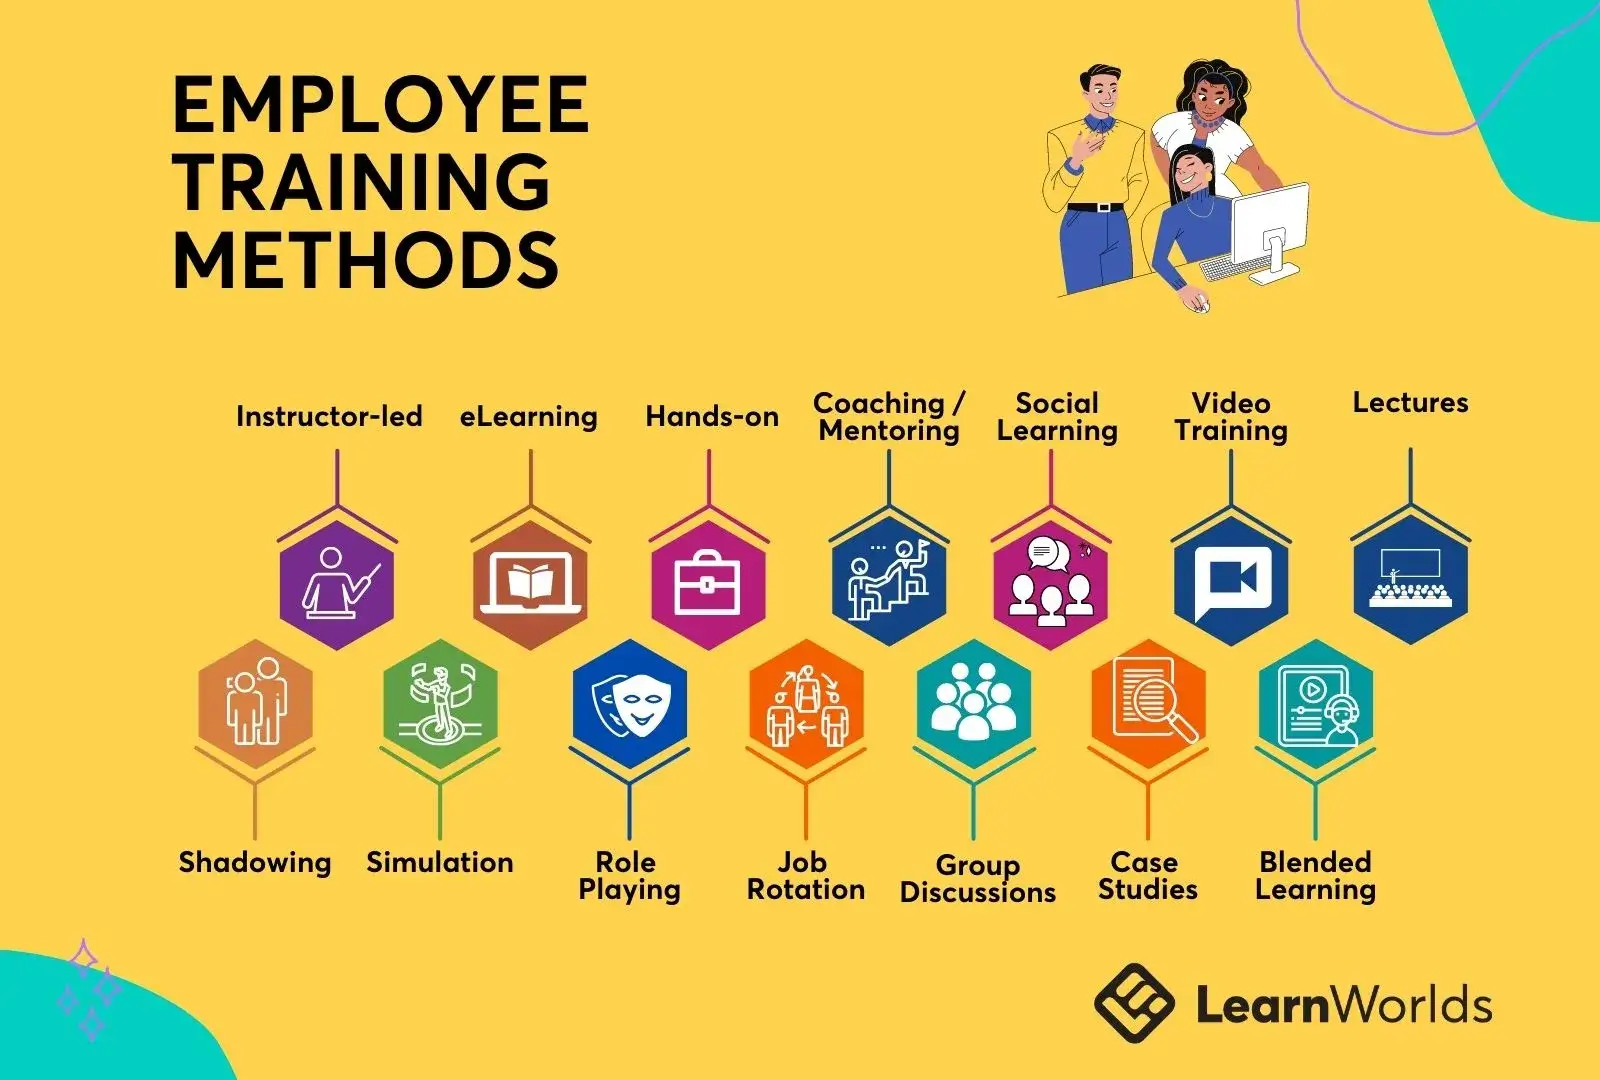 Employee training methods infographic showing: Instructor-led, training, eLearning, Hands-on Training, Coaching or Mentoring, Shadowing, Simulation, Role Playing, Job Rotation, Group Discussions, Social Learning, Video Training, Lectures, Case Studies & Required Reading, Blended learning